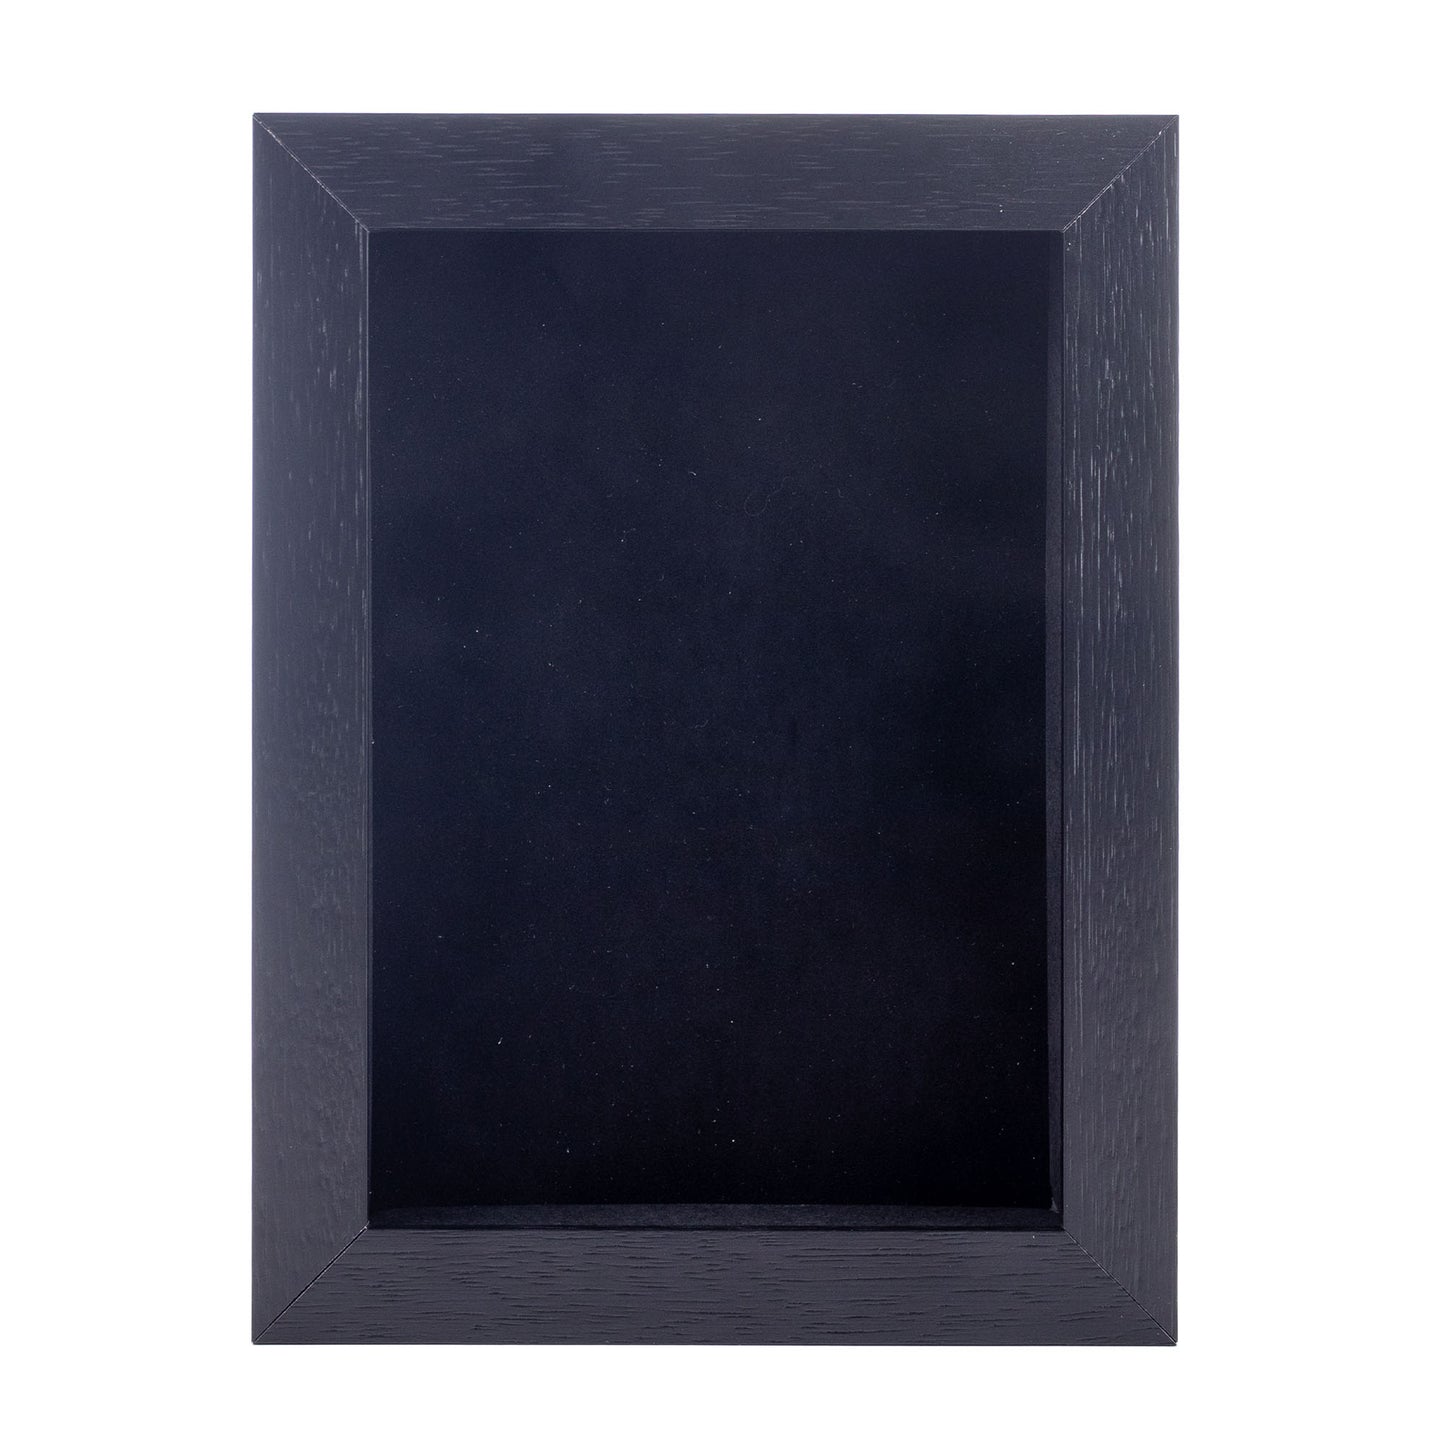 Textured Black Shadow Box Frame With Black Acid-Free Suede Backing